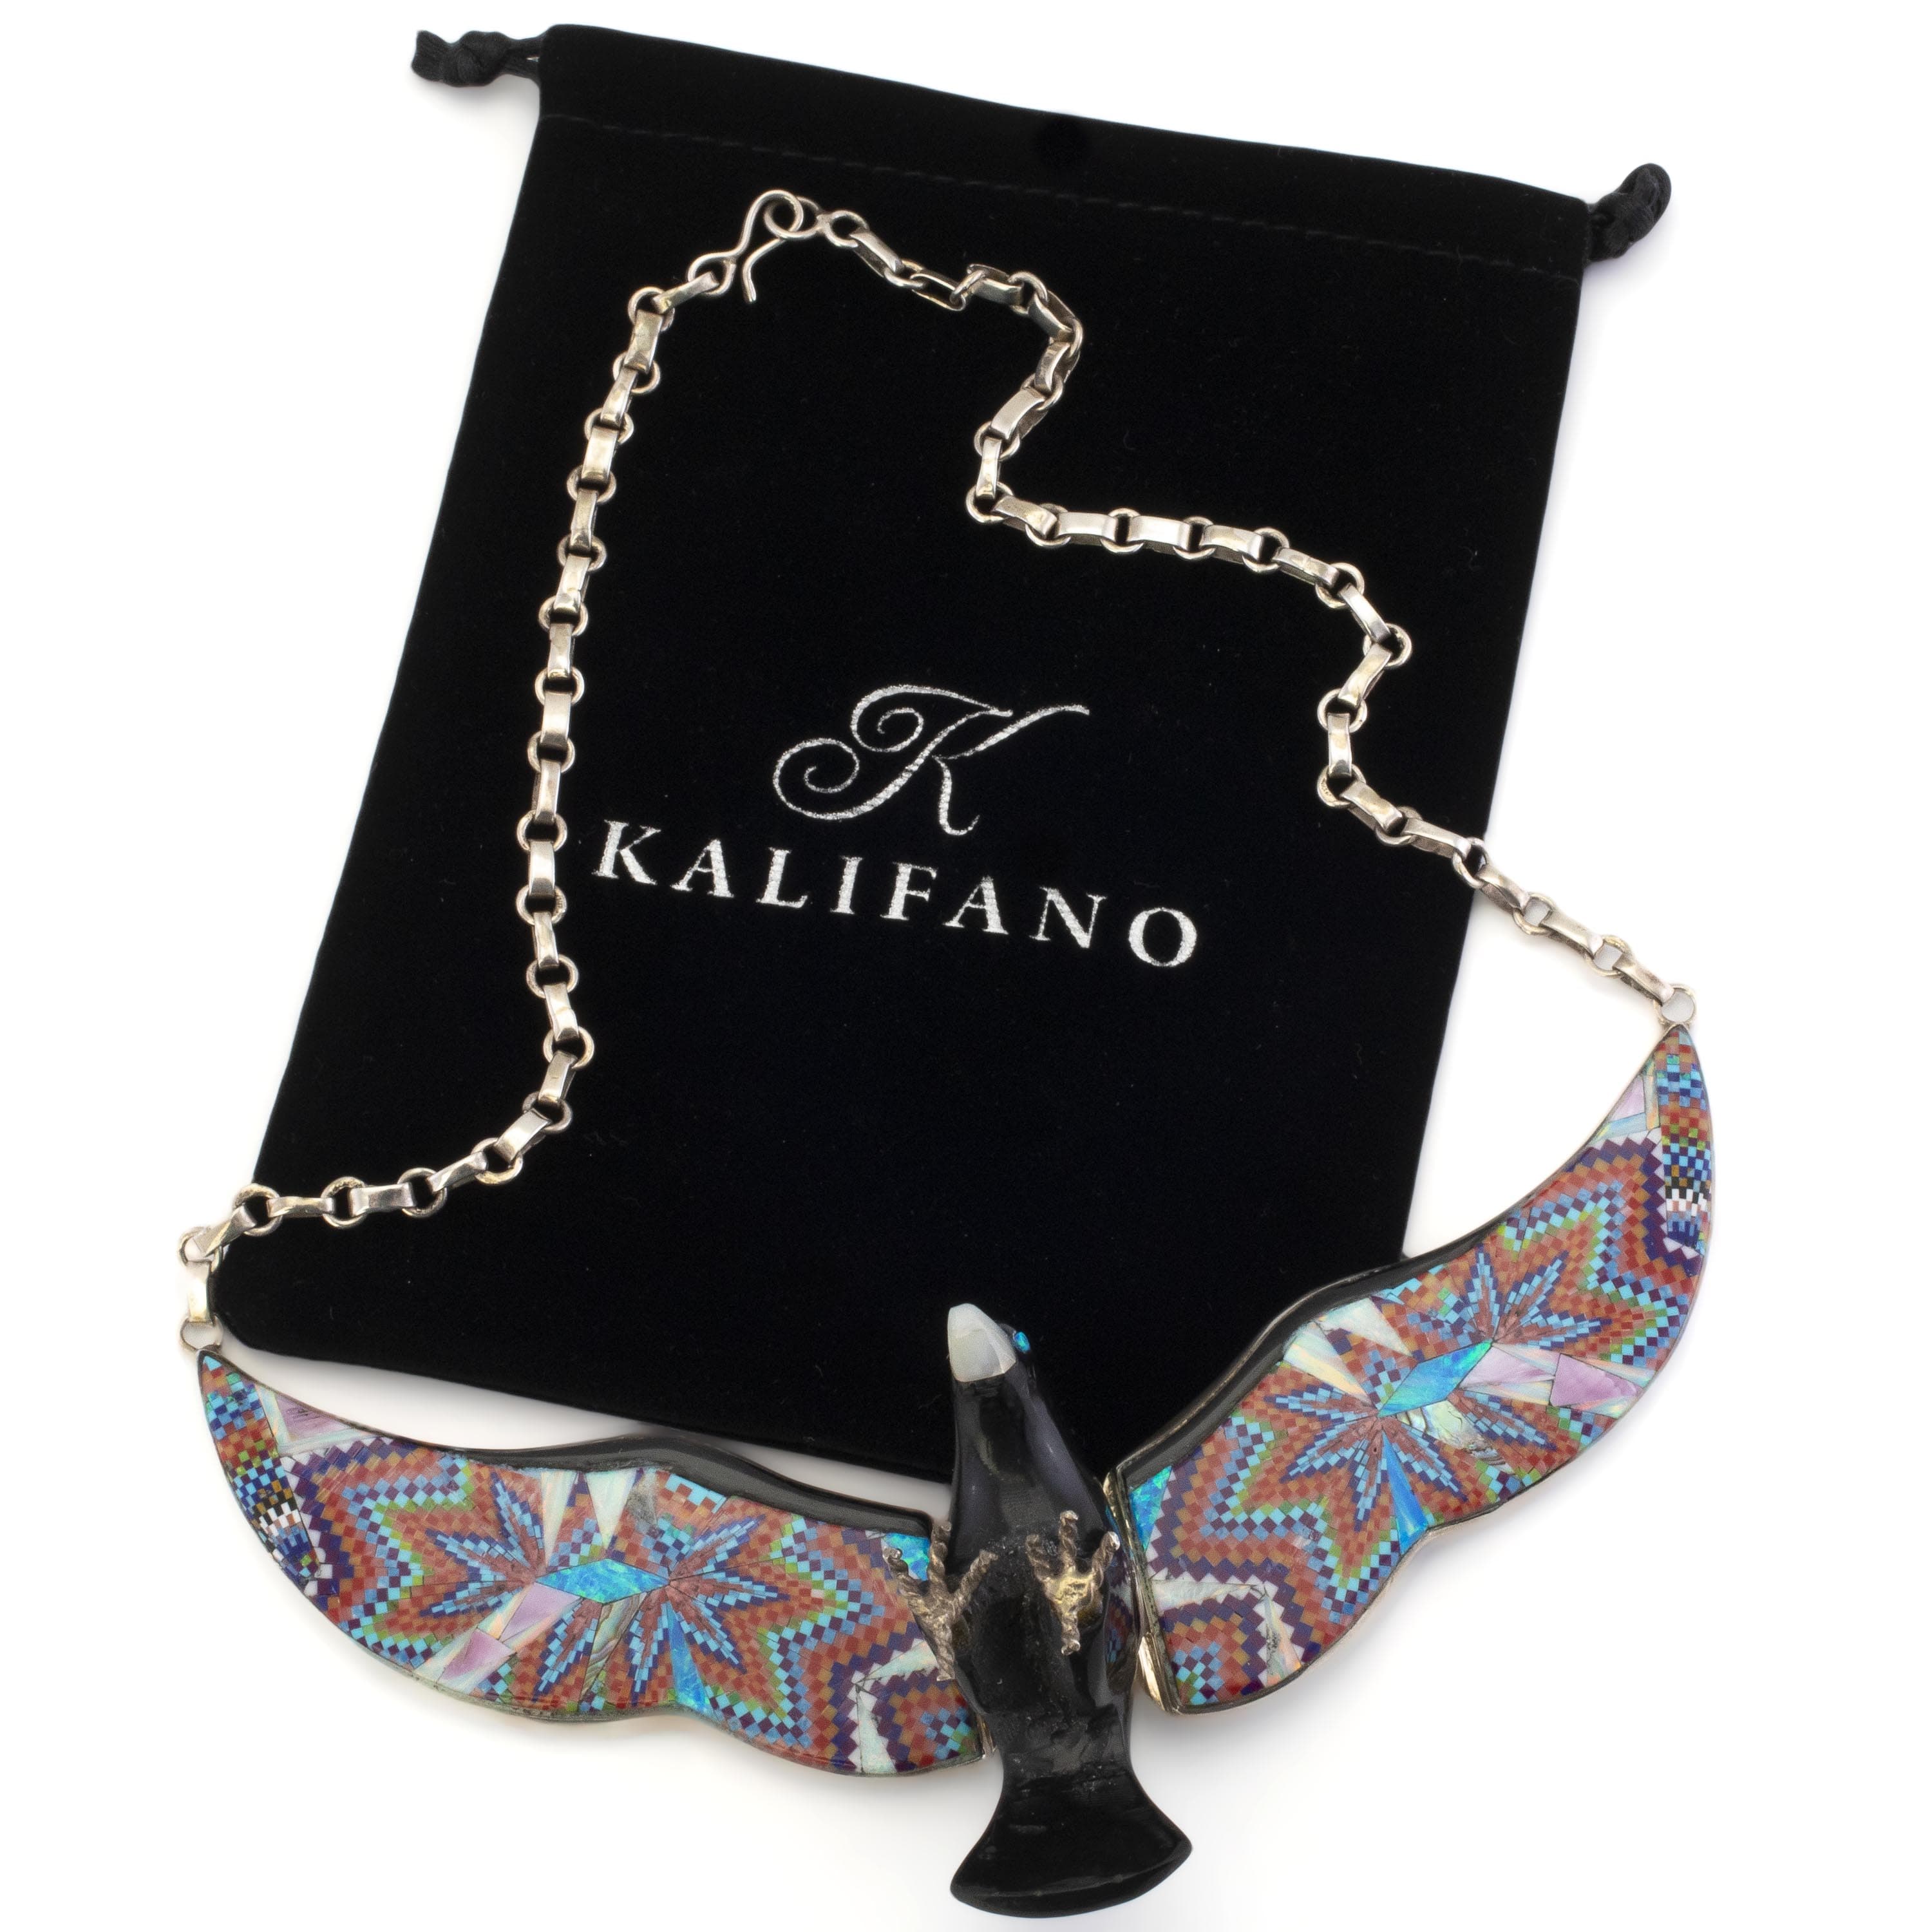 KALIFANO Southwest Silver Jewelry Black Jet Eagle with Multi Gem Opal Micro Inlay Wings Handmade 925 Sterling Silver Necklace AKN2400.001